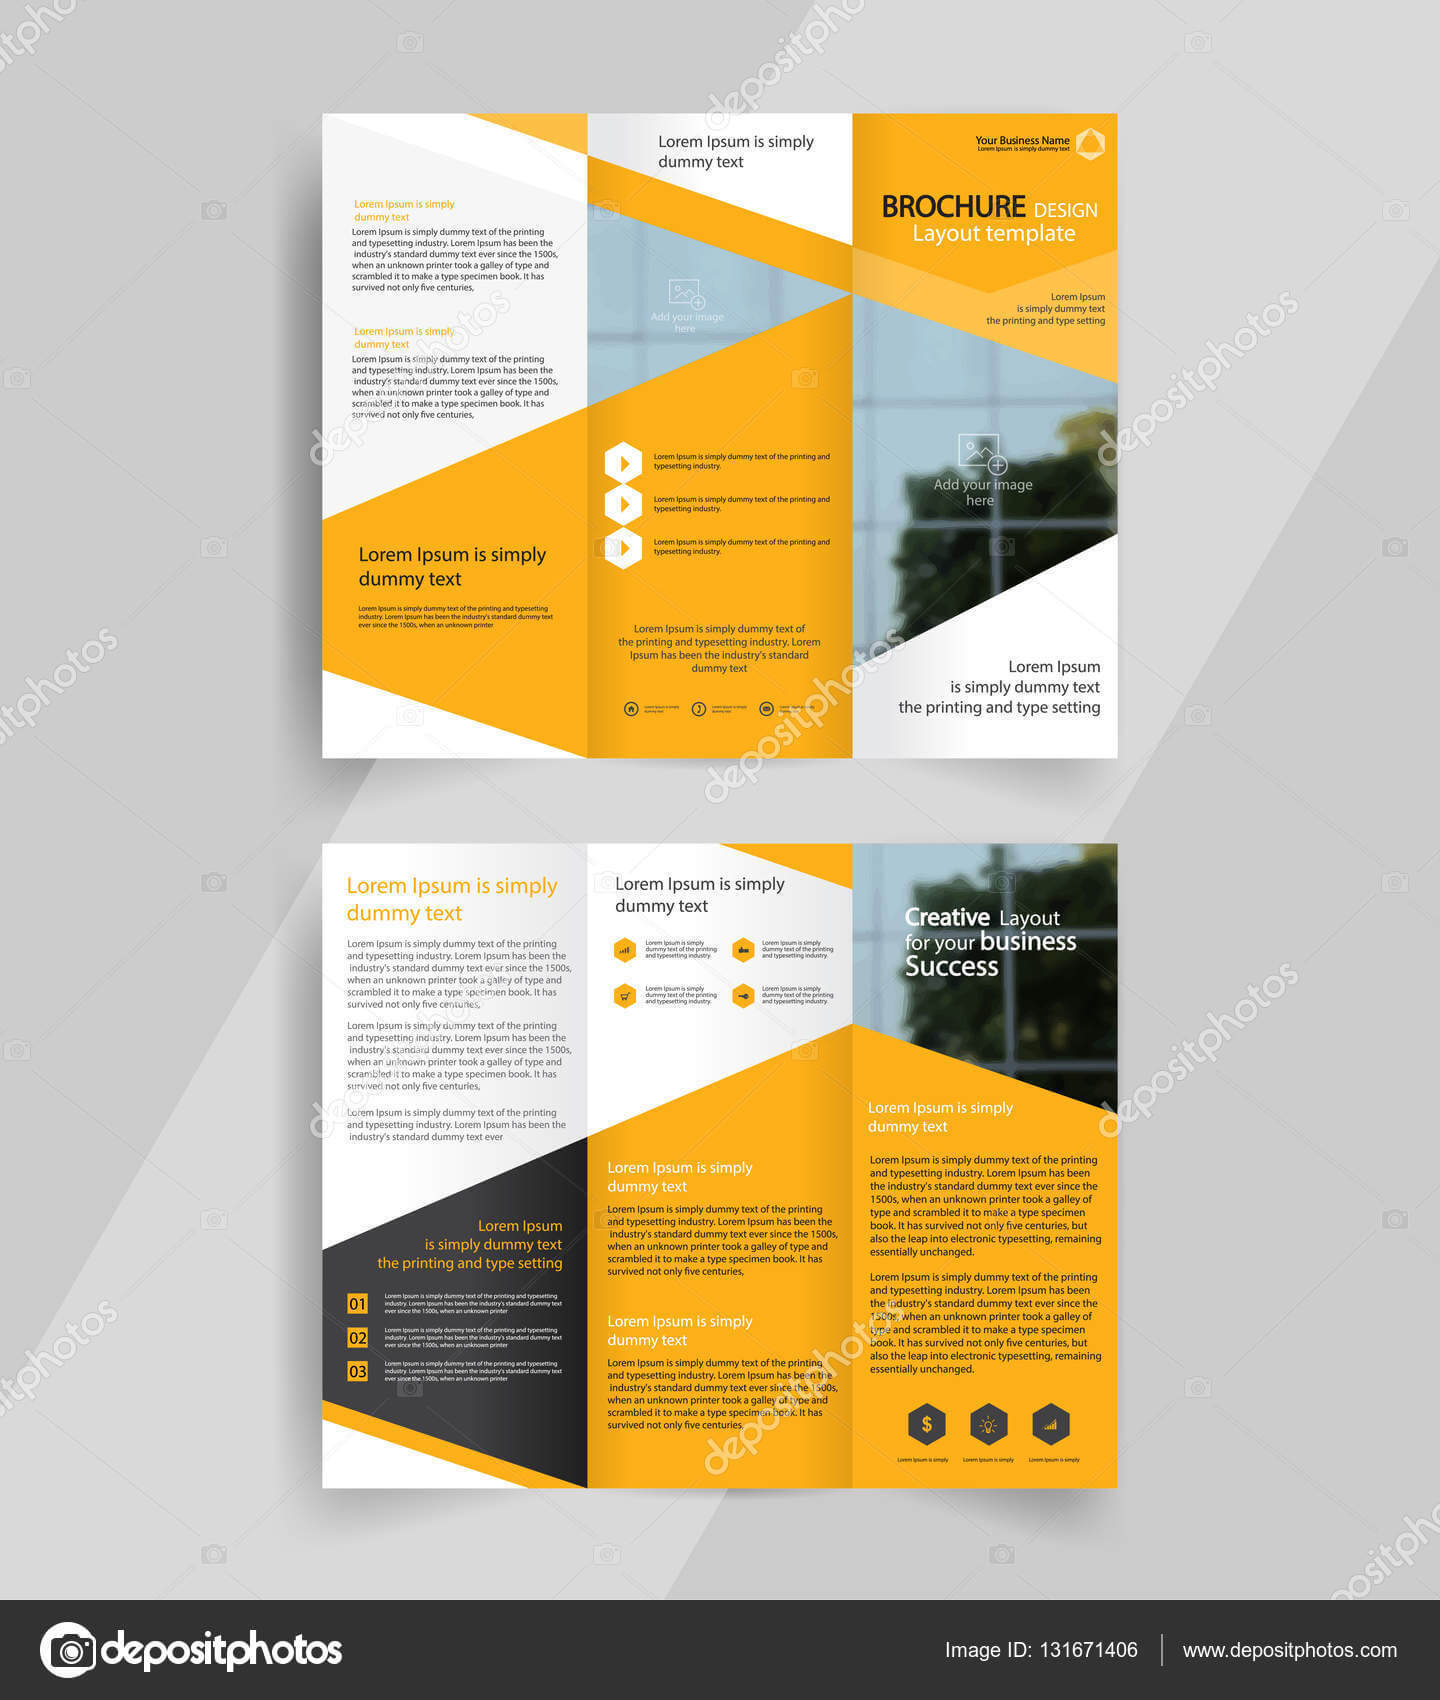 007 Depositphotos 131671406 Stock Illustration Business Tri With Regard To Brochure Template Illustrator Free Download